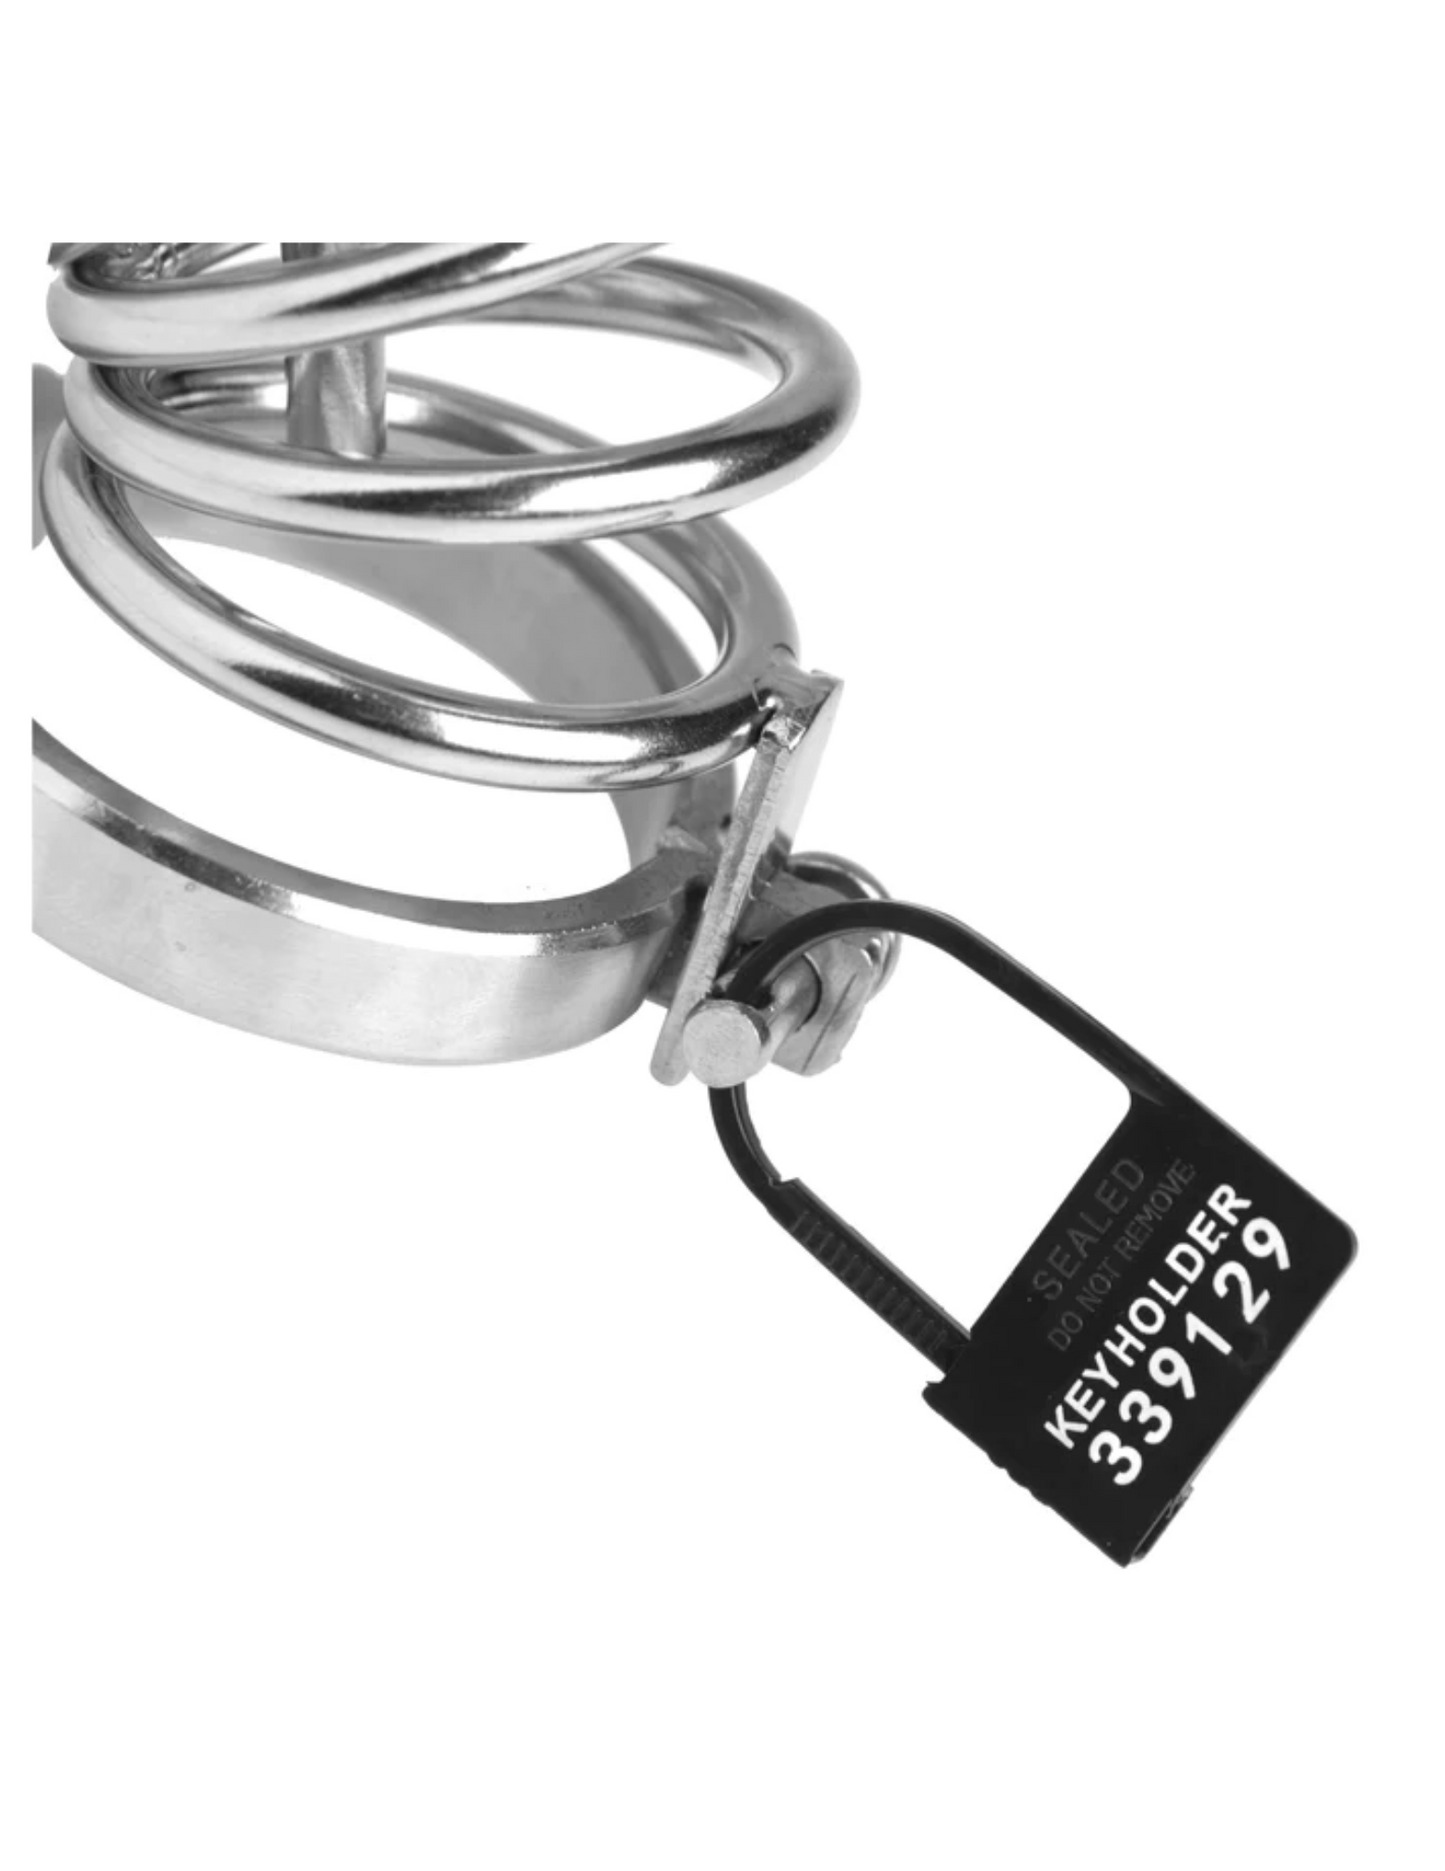 Image of a plastic lock being used on a metal chastity cage.